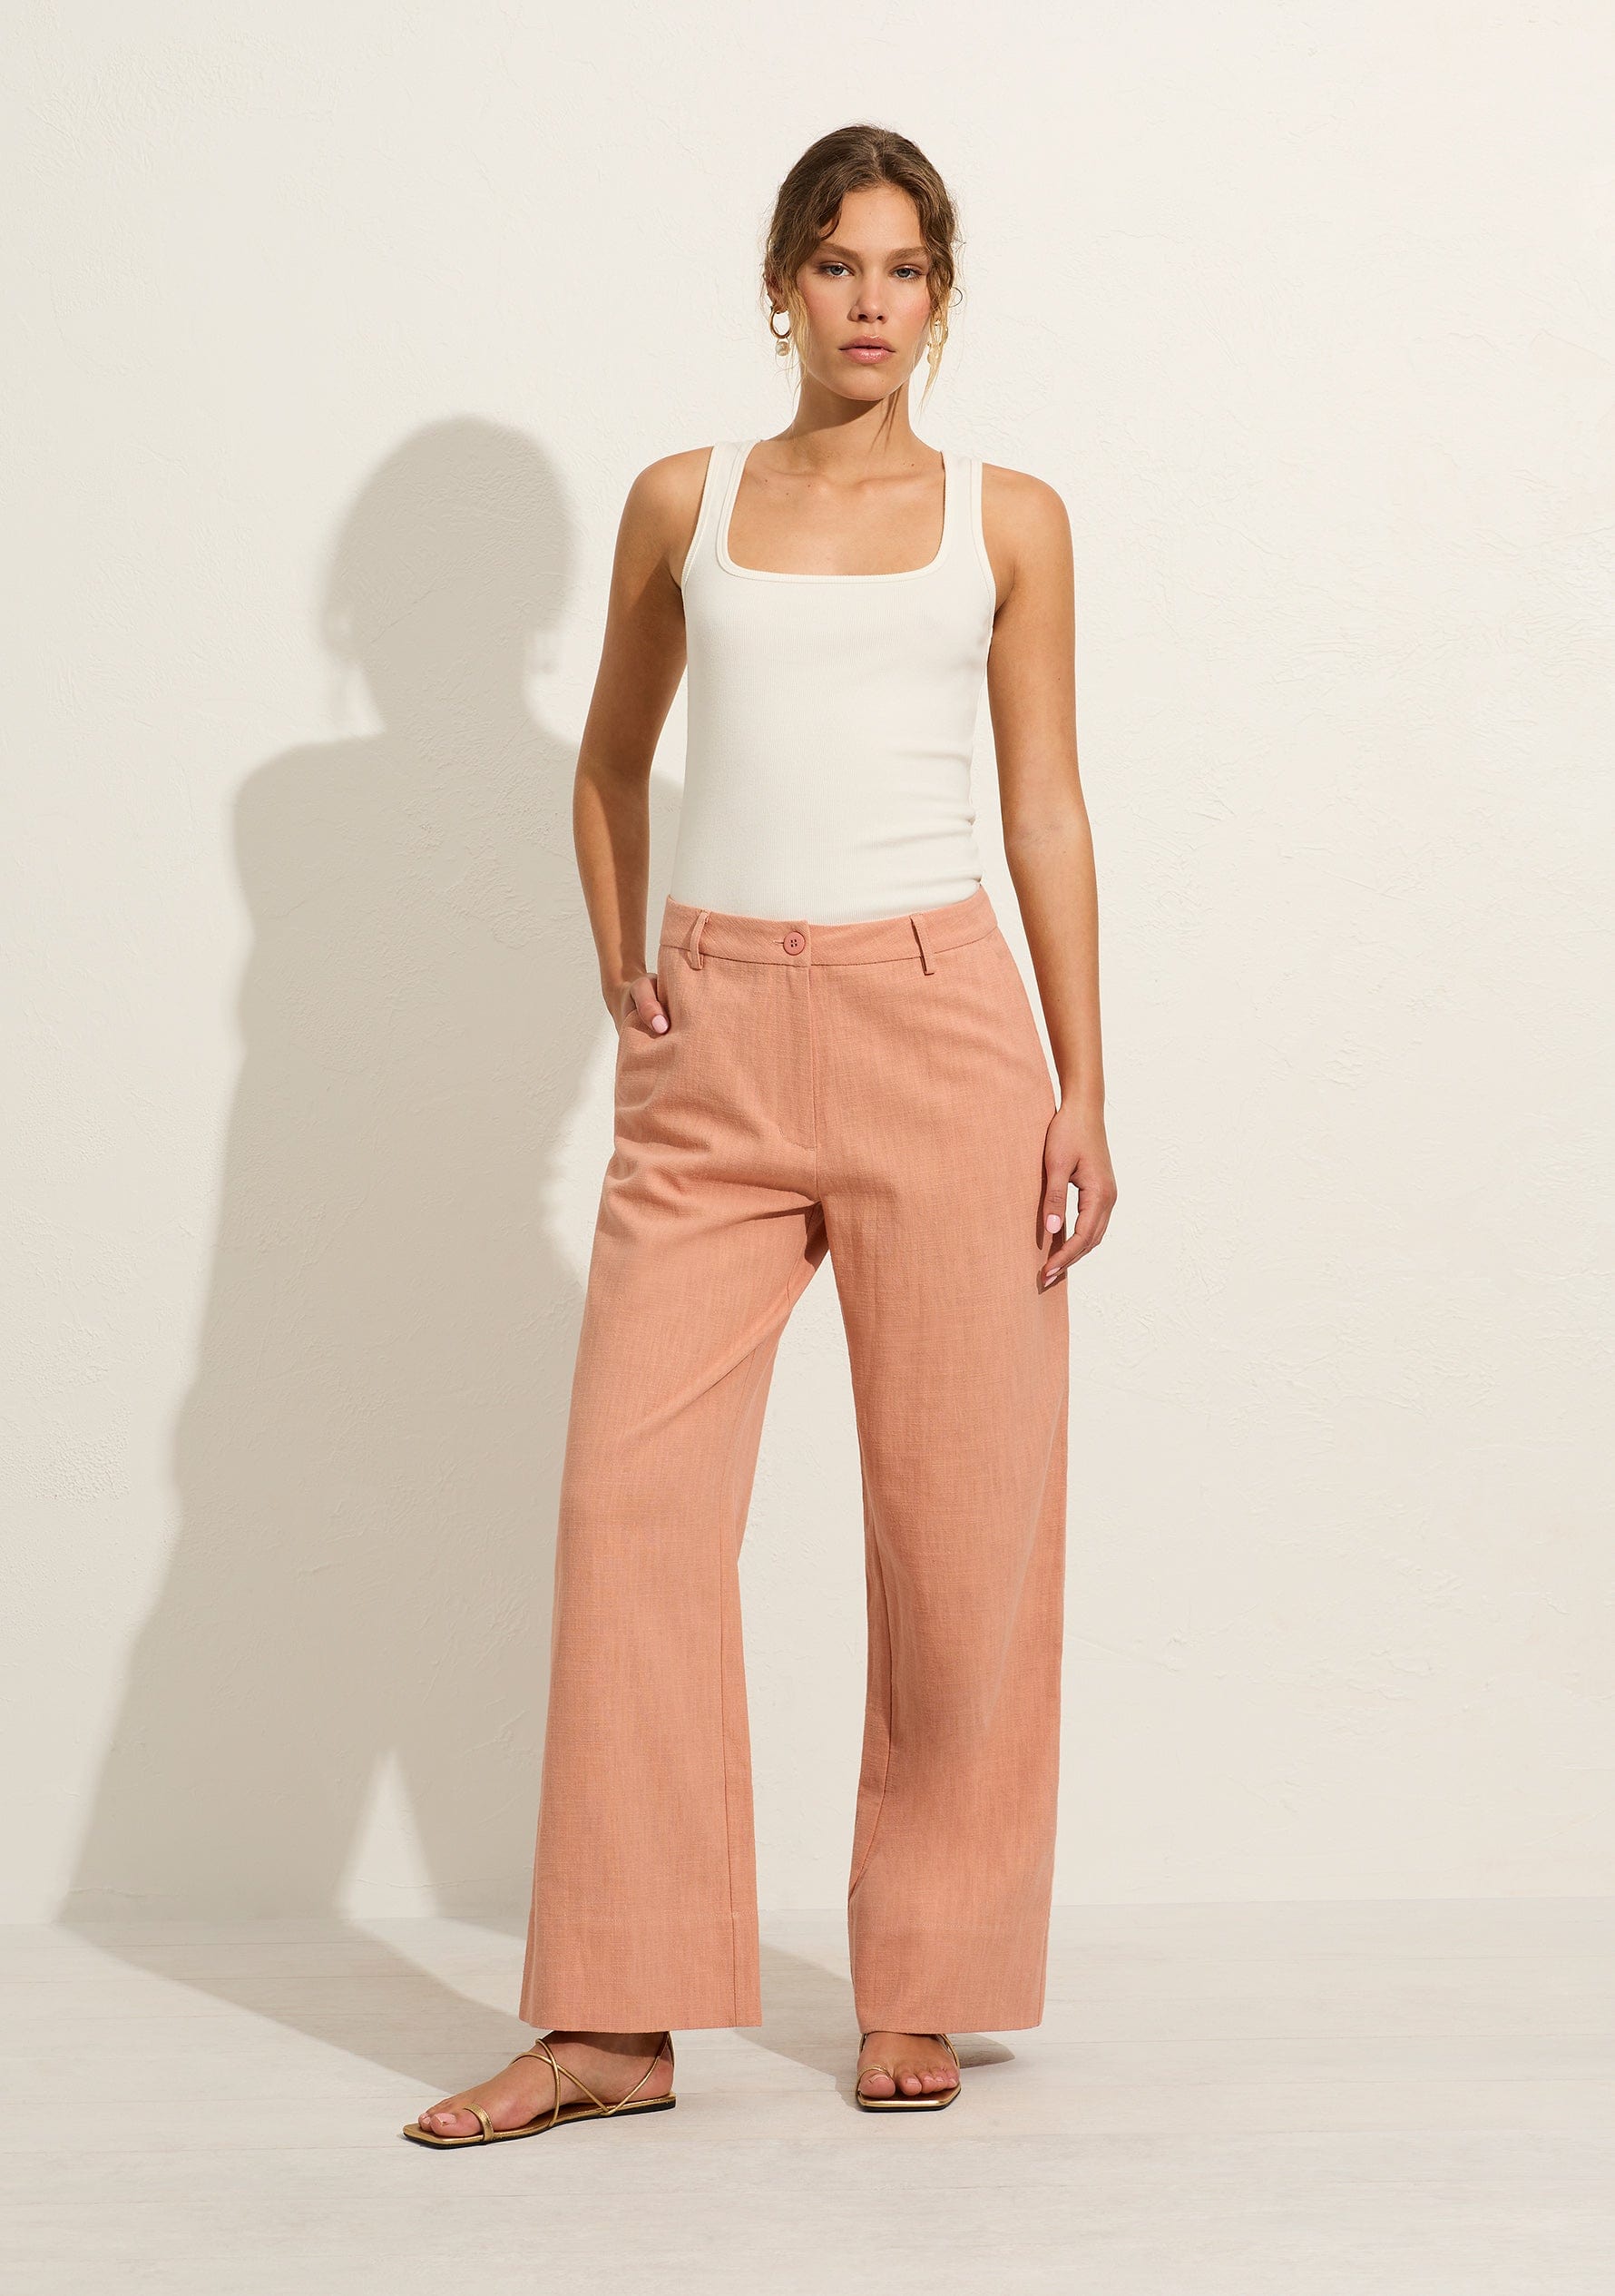 Womens' Summer Pants - Vintage Inspired - Auguste The Label